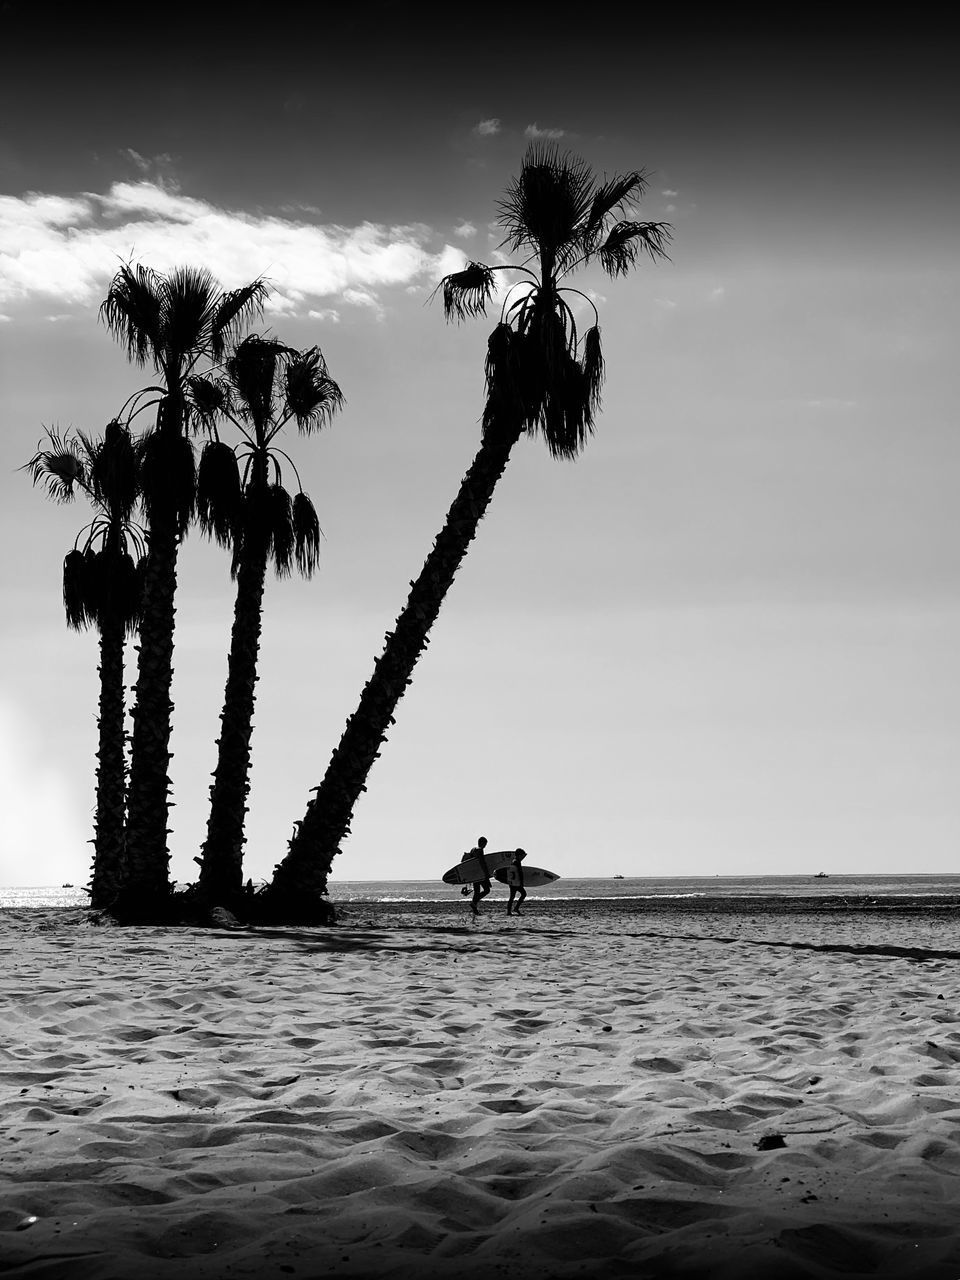 SILHOUETTE PALM TREES ON SHORE AGAINST SKY